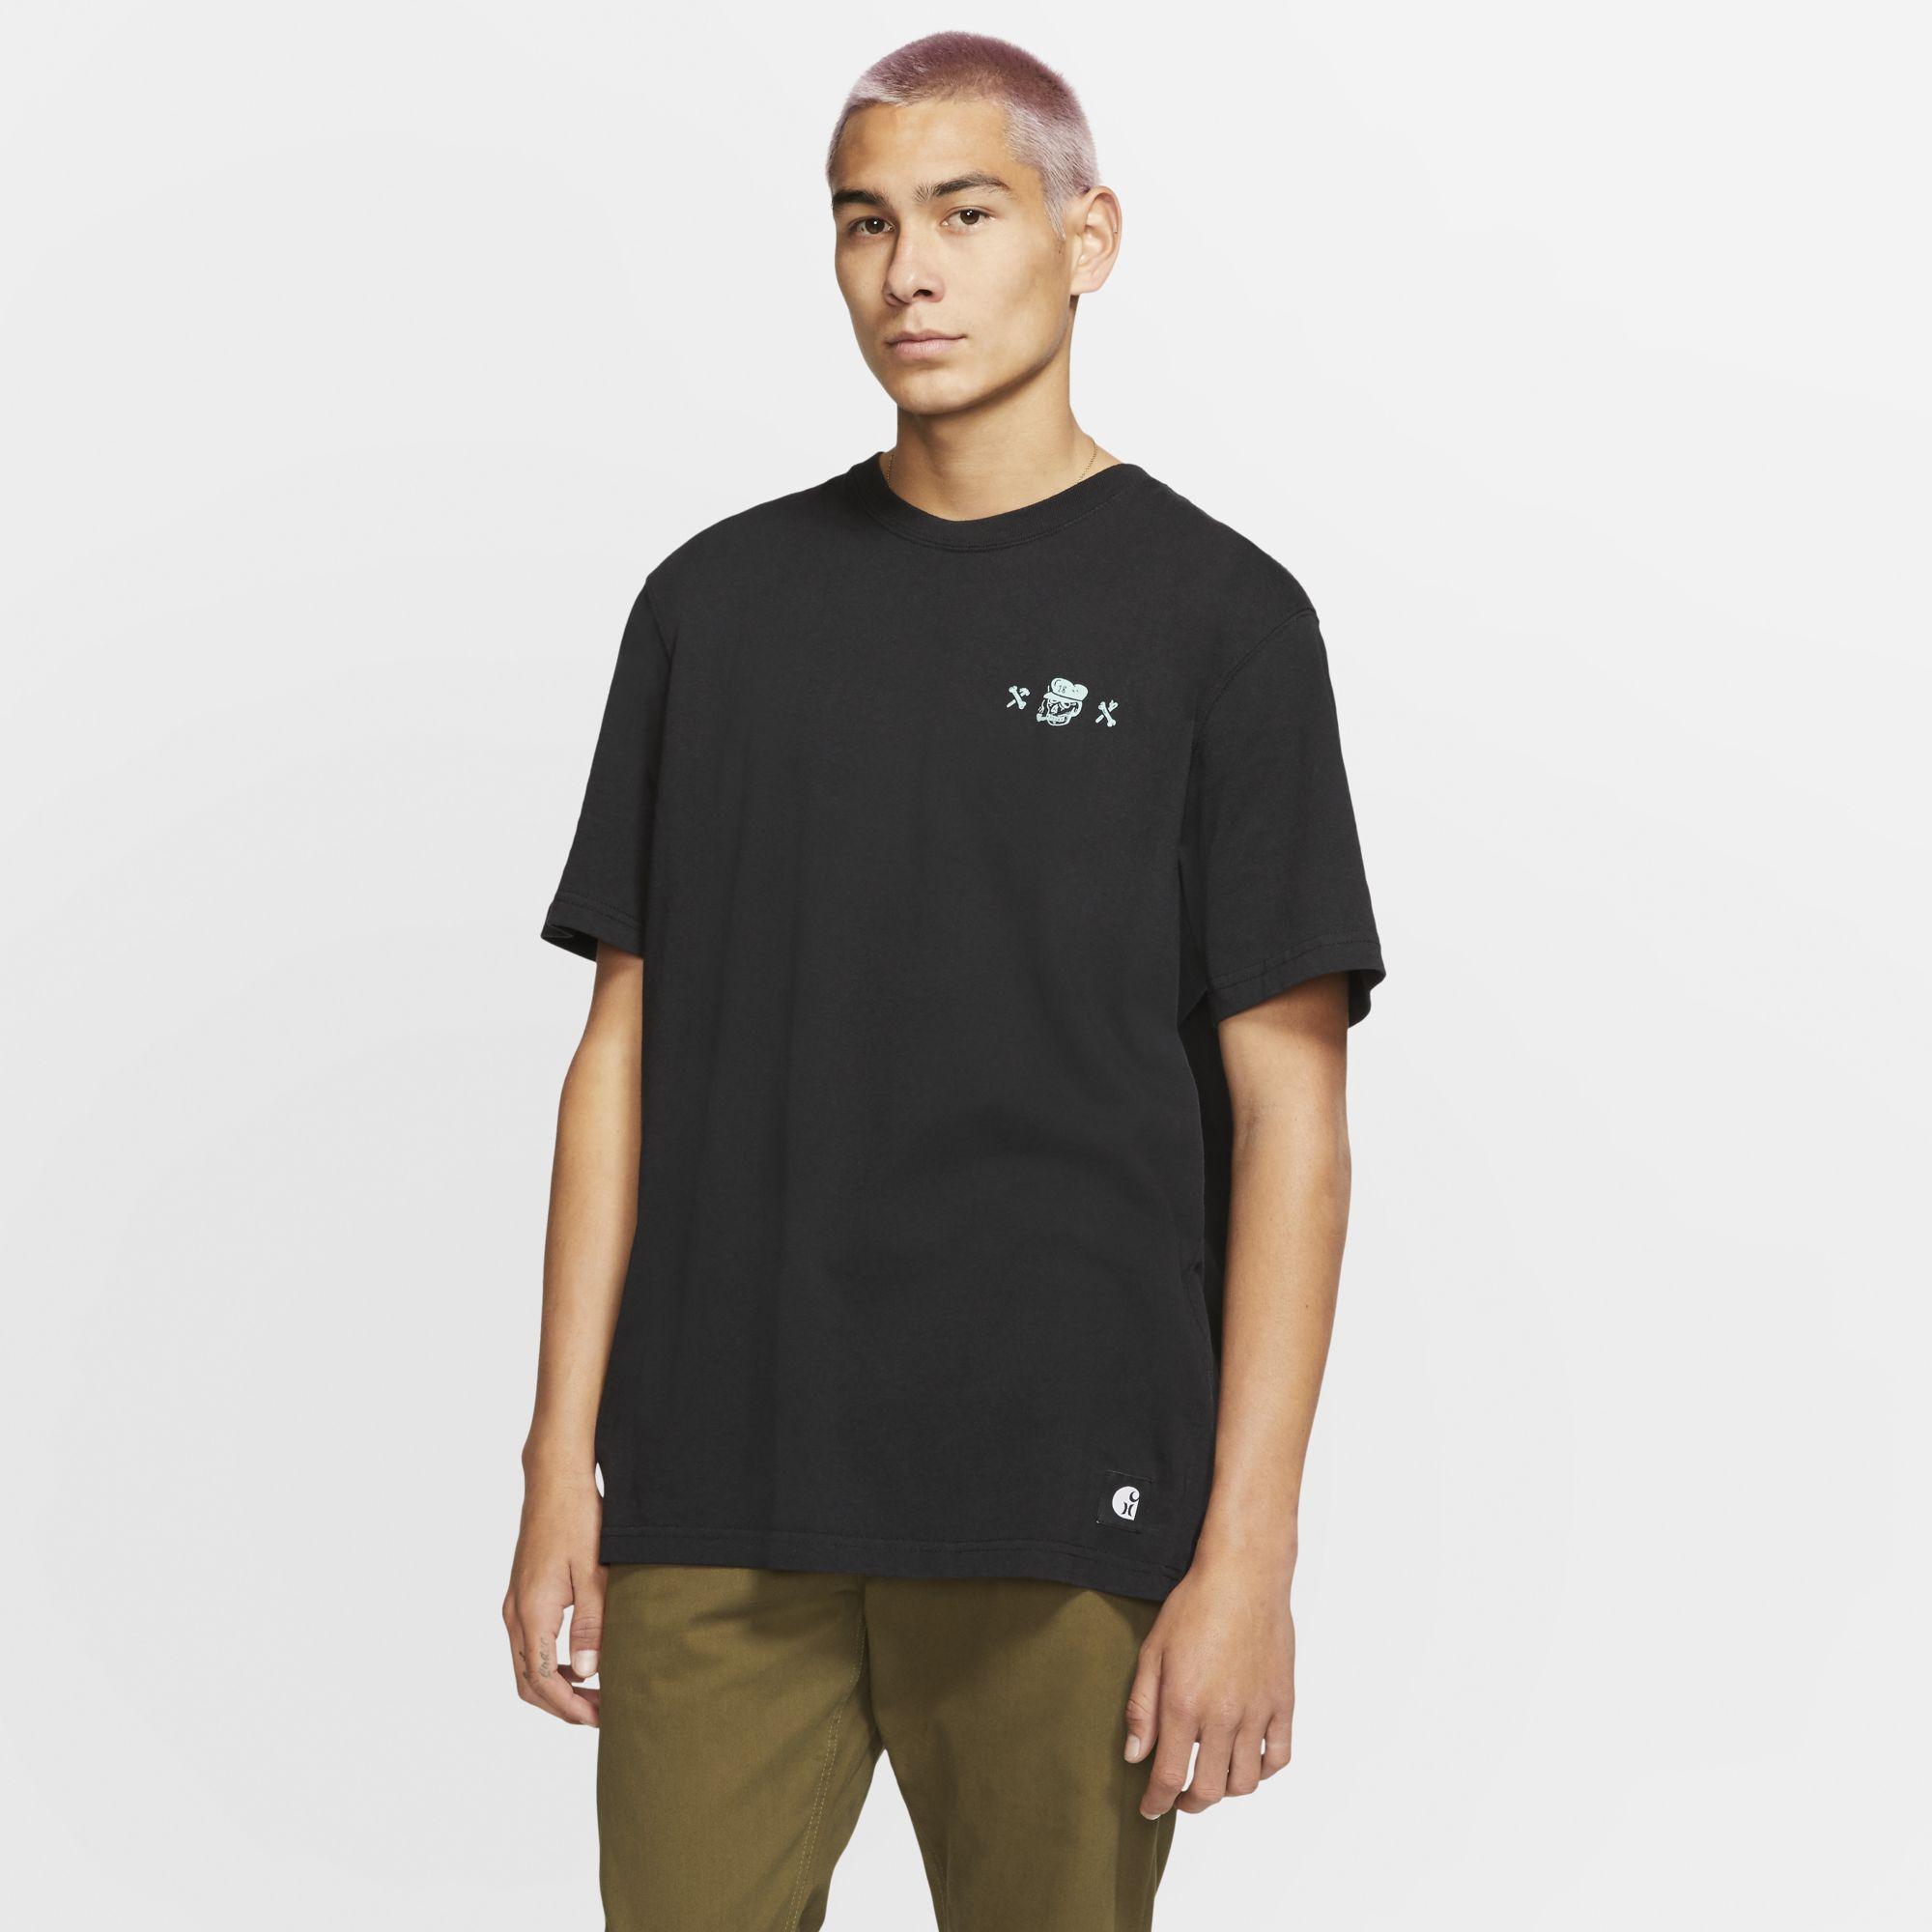 Nike Cotton Hurley X Carhartt Handcrafted T-shirt in Black for Men - Lyst